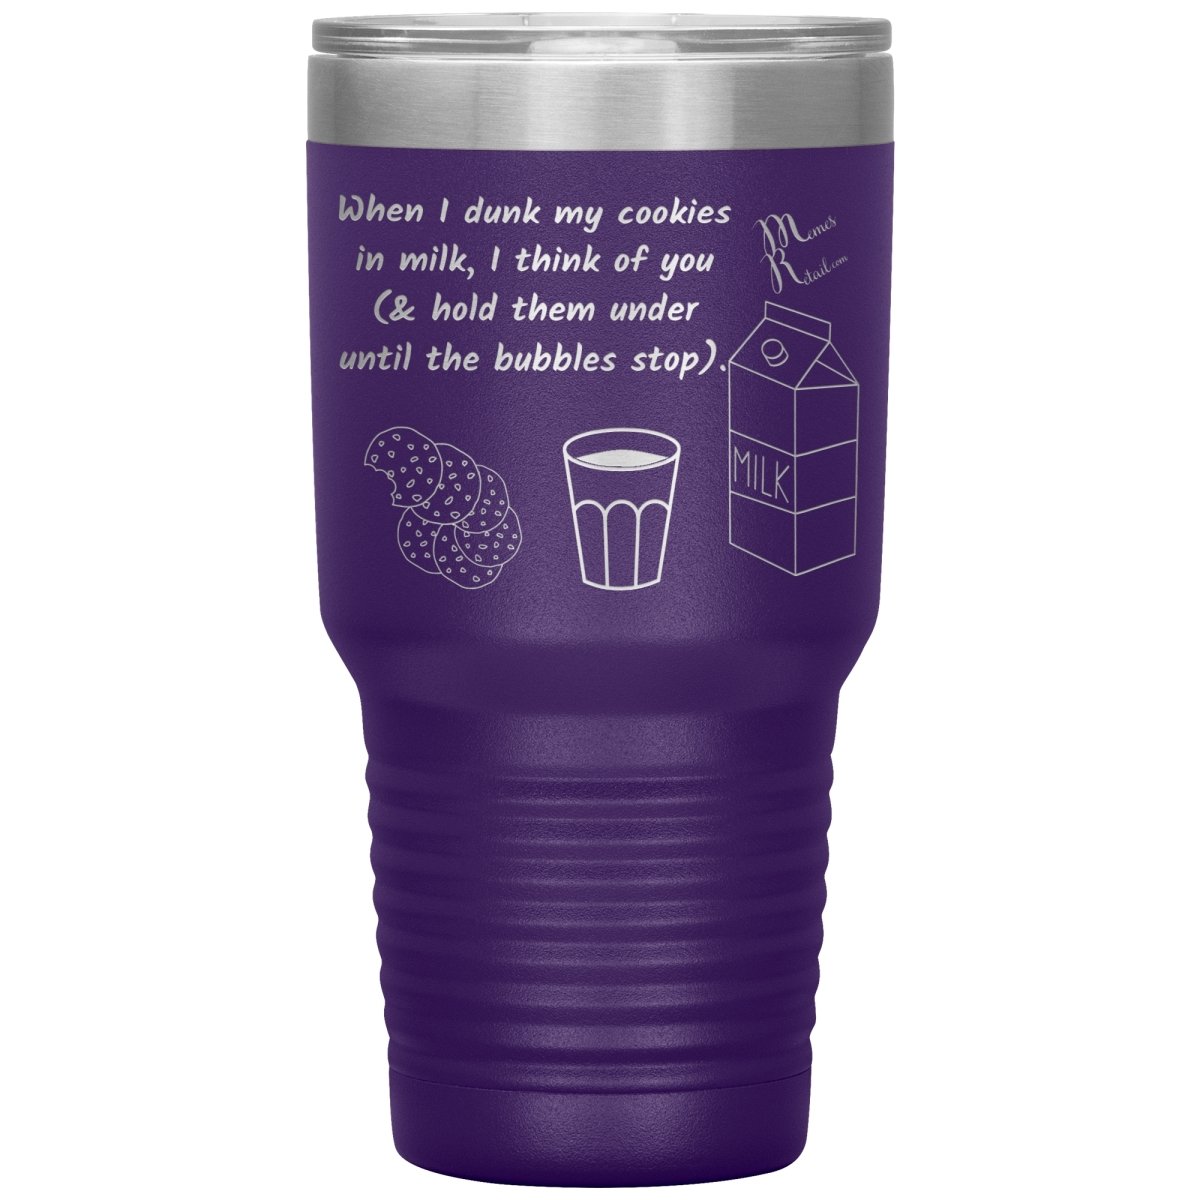 When I dunk My Cookies in Milk, I think of You - Tumblers, 30oz Insulated Tumbler / Purple - MemesRetail.com